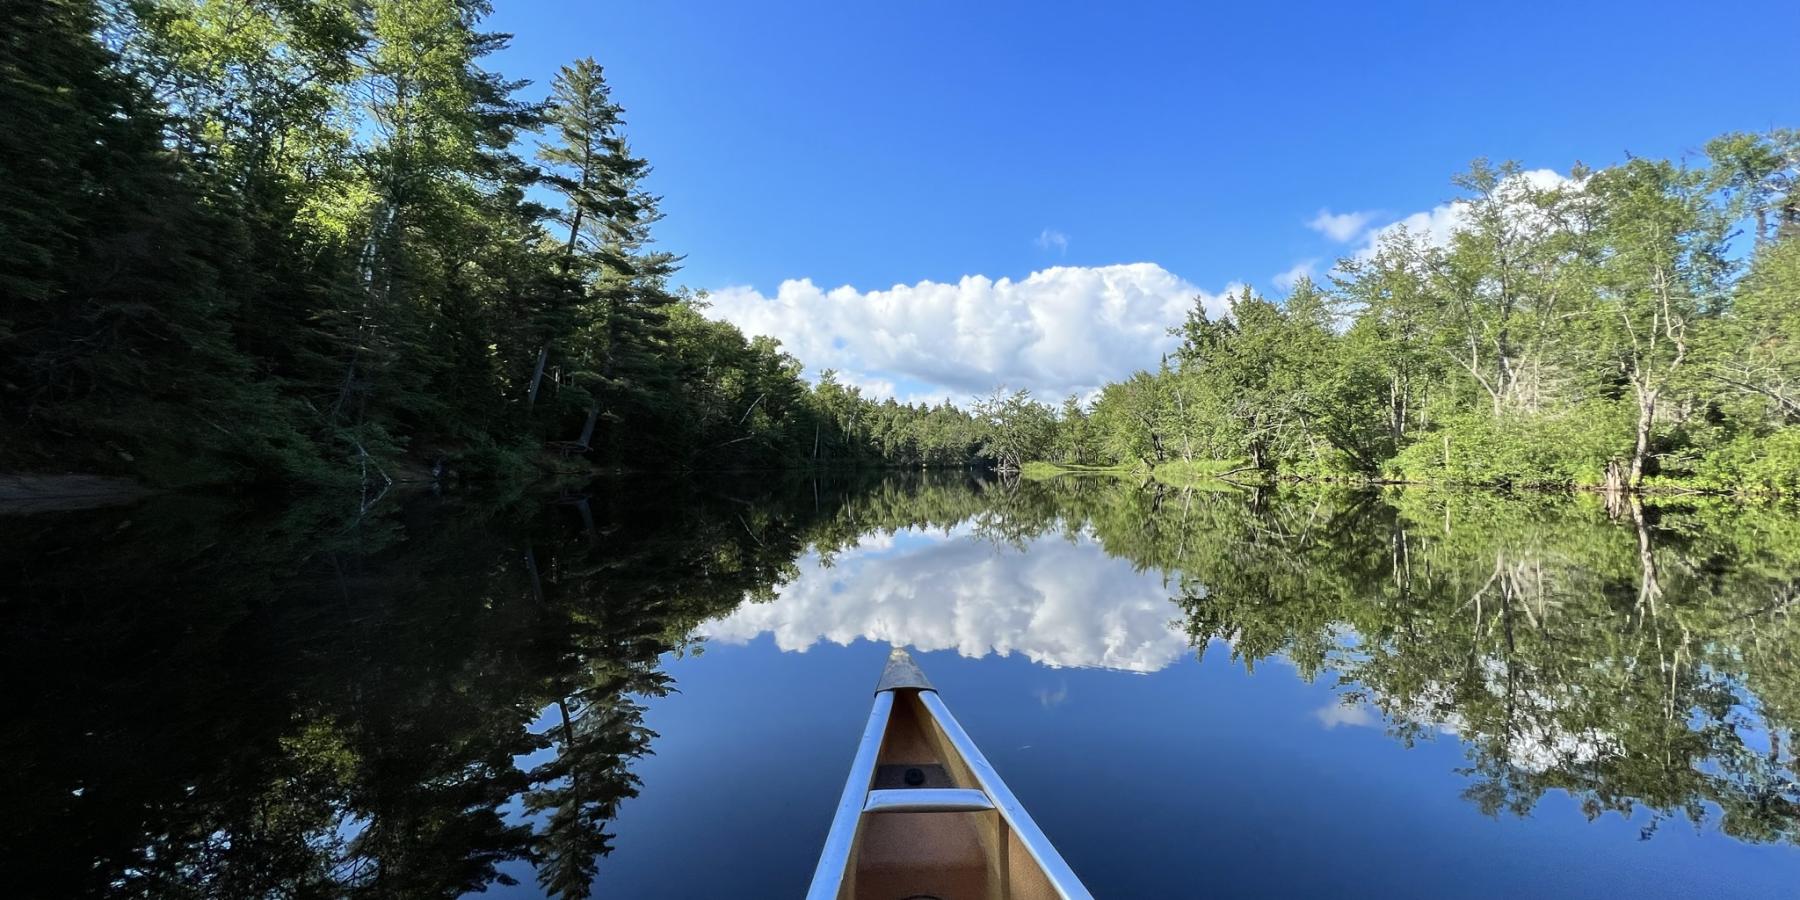 Solo paddle on the Saranac River